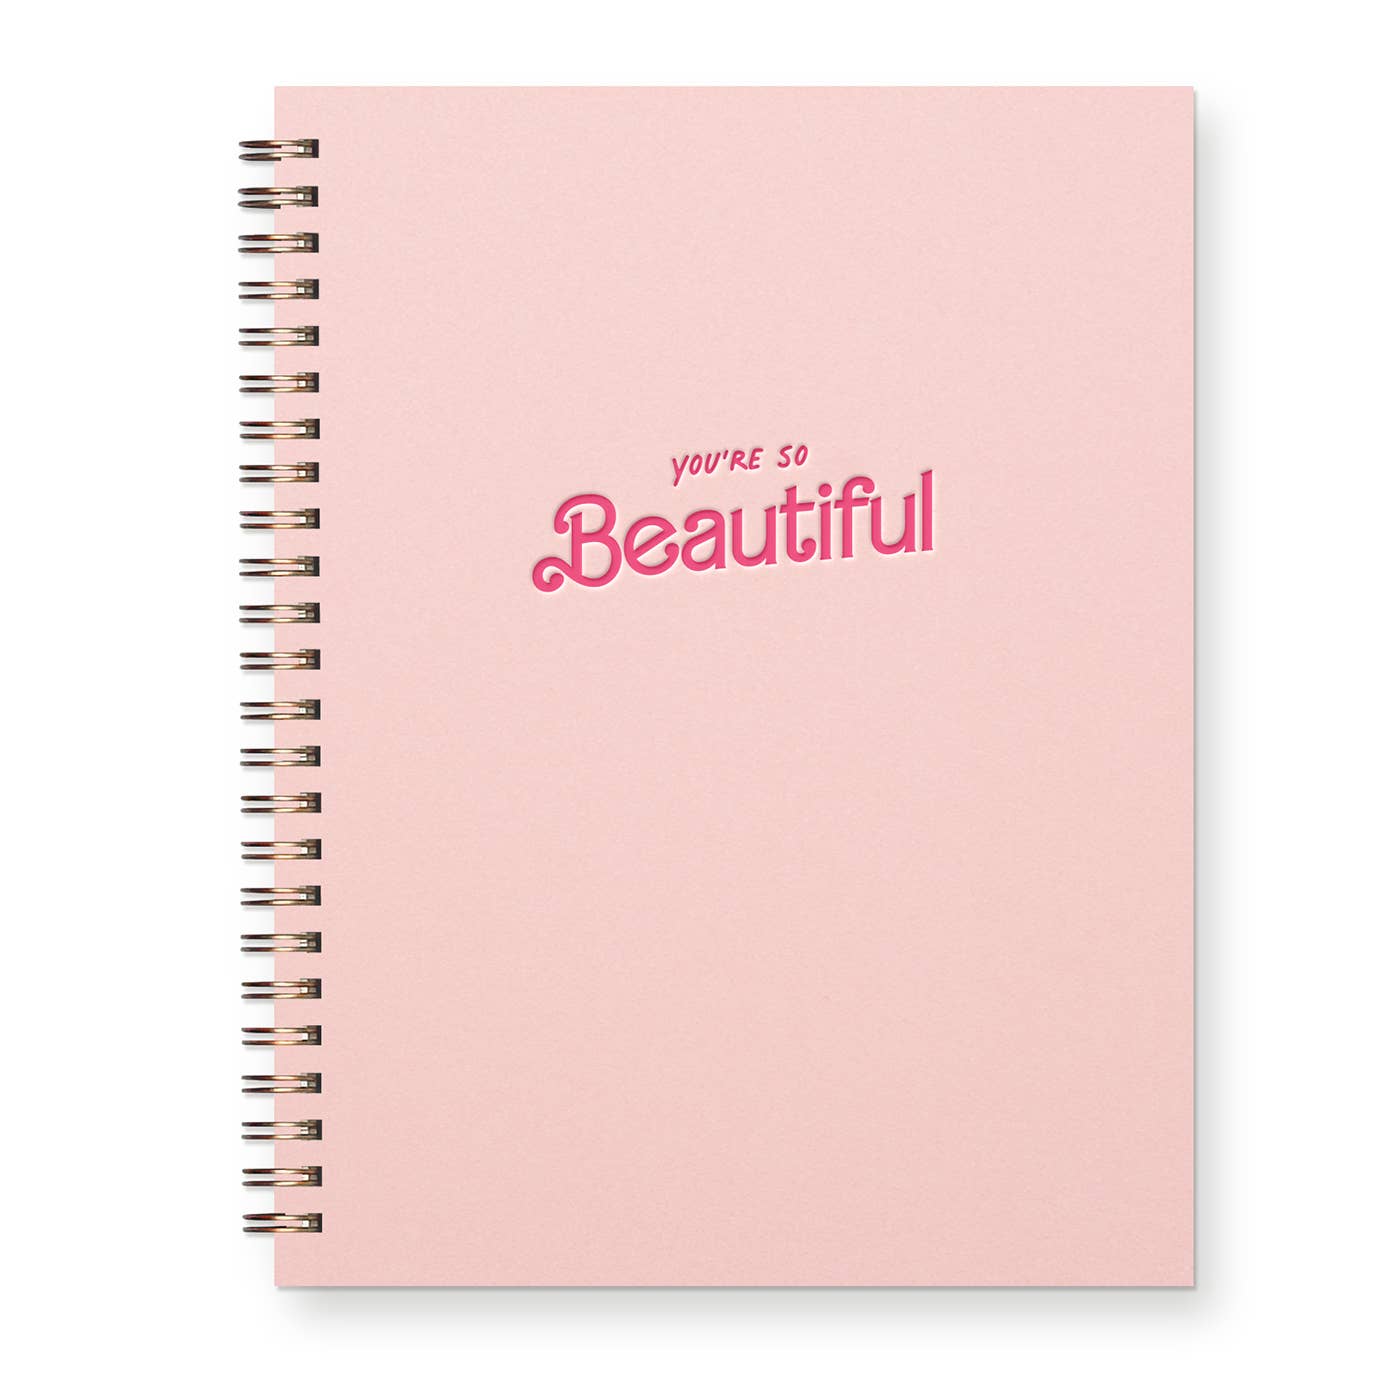 You're So Beautiful Journal: Lined Notebook